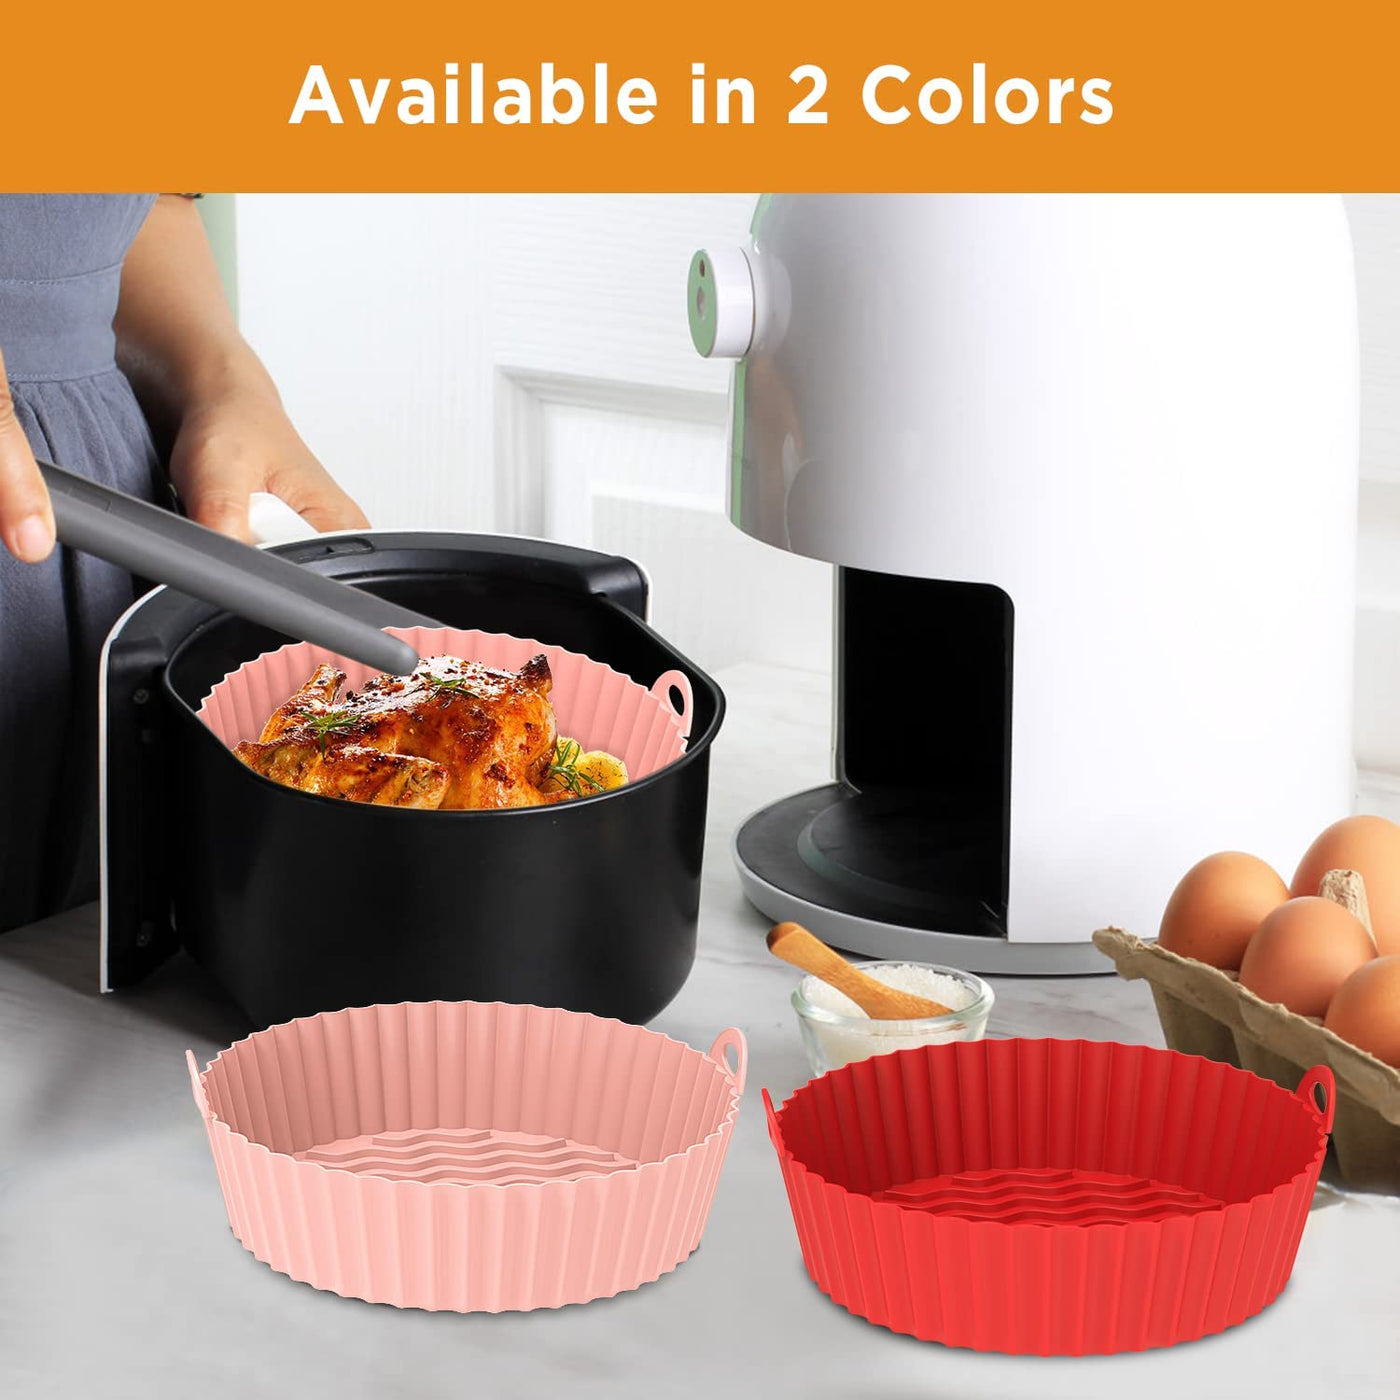 OUTXE Reusable Air Fryer Silicone Linert 7.5inch (3 to 5QT)